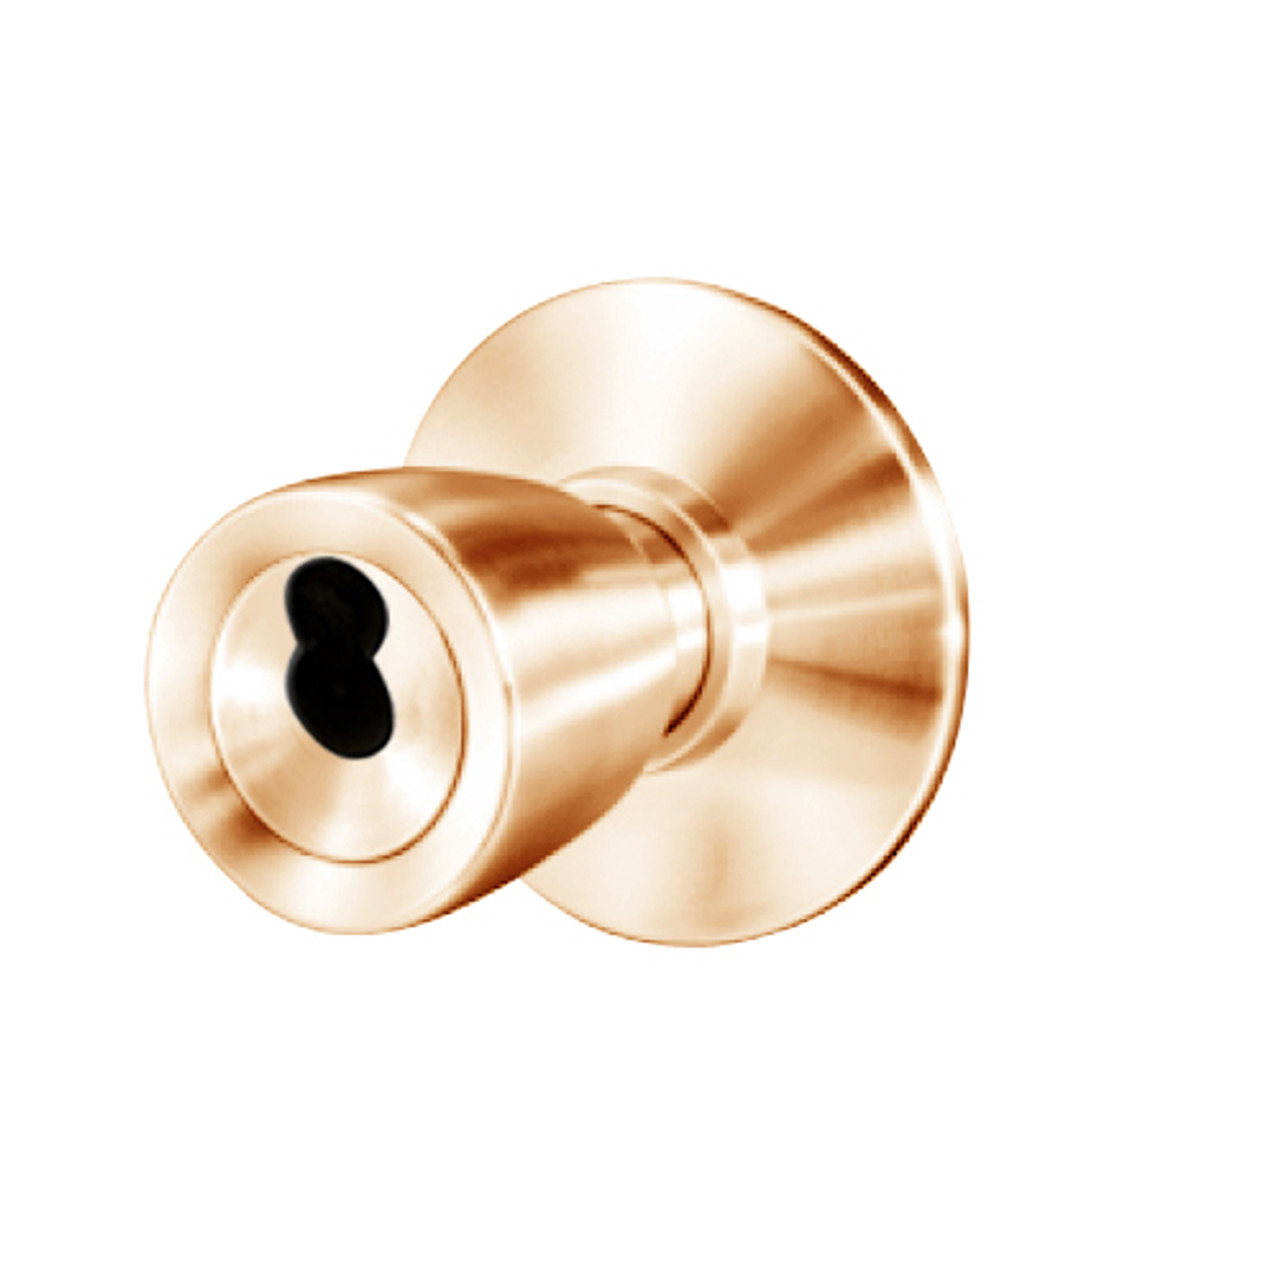 8K57YD6DS3612 Best 8K Series Exit Heavy Duty Cylindrical Knob Locks with Tulip Style in Satin Bronze